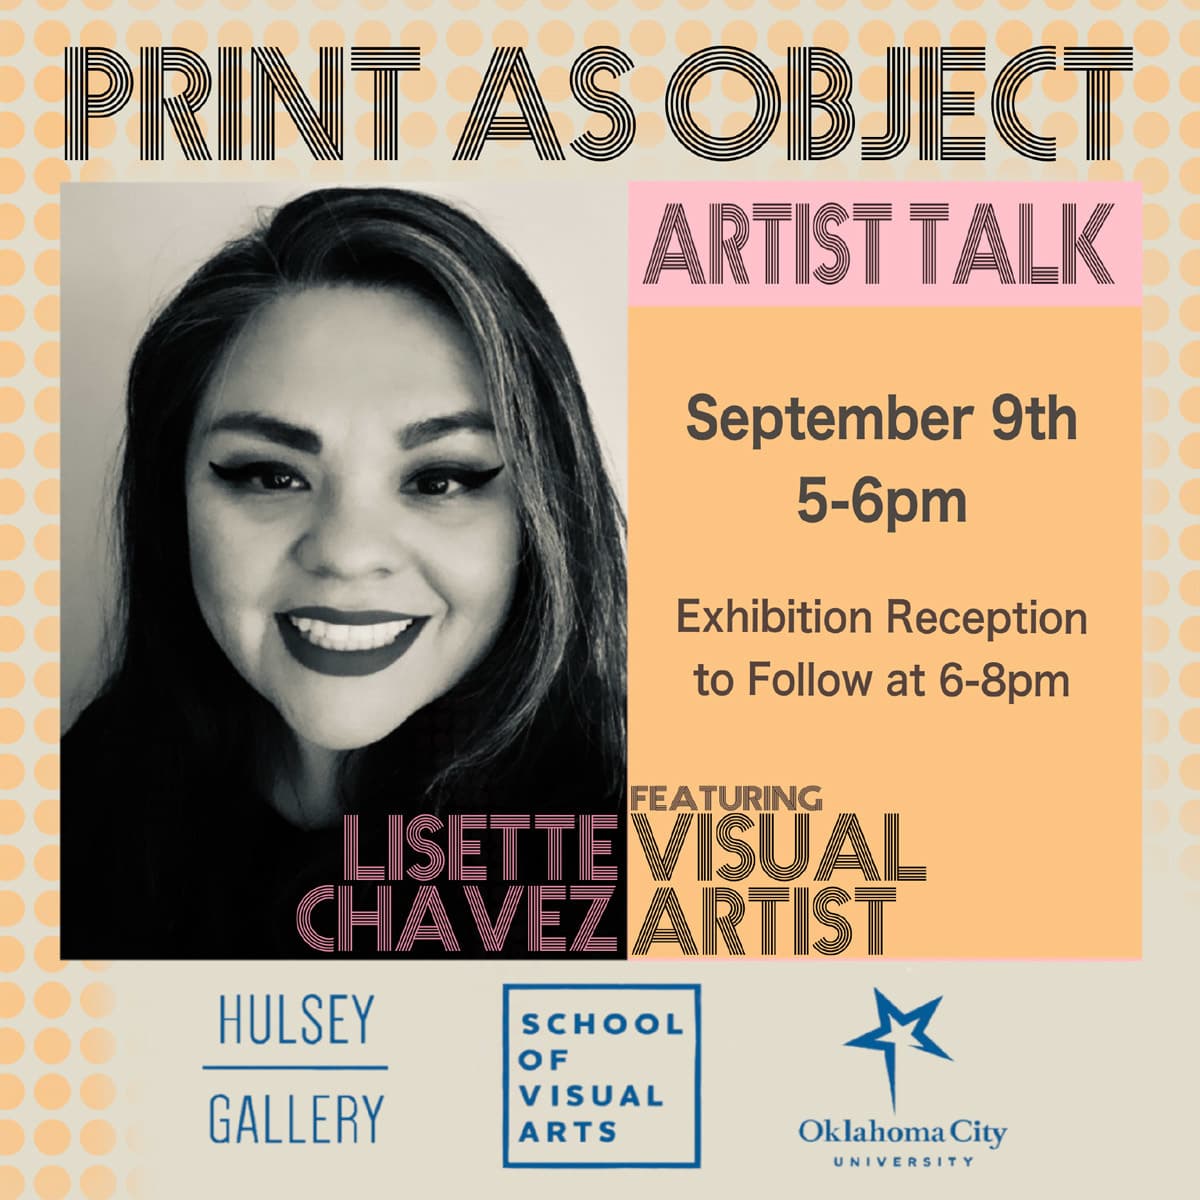 print as object artist talk - september 9th 5-6pm - exhibition reception to follow at 6-8pm - lisette chavez